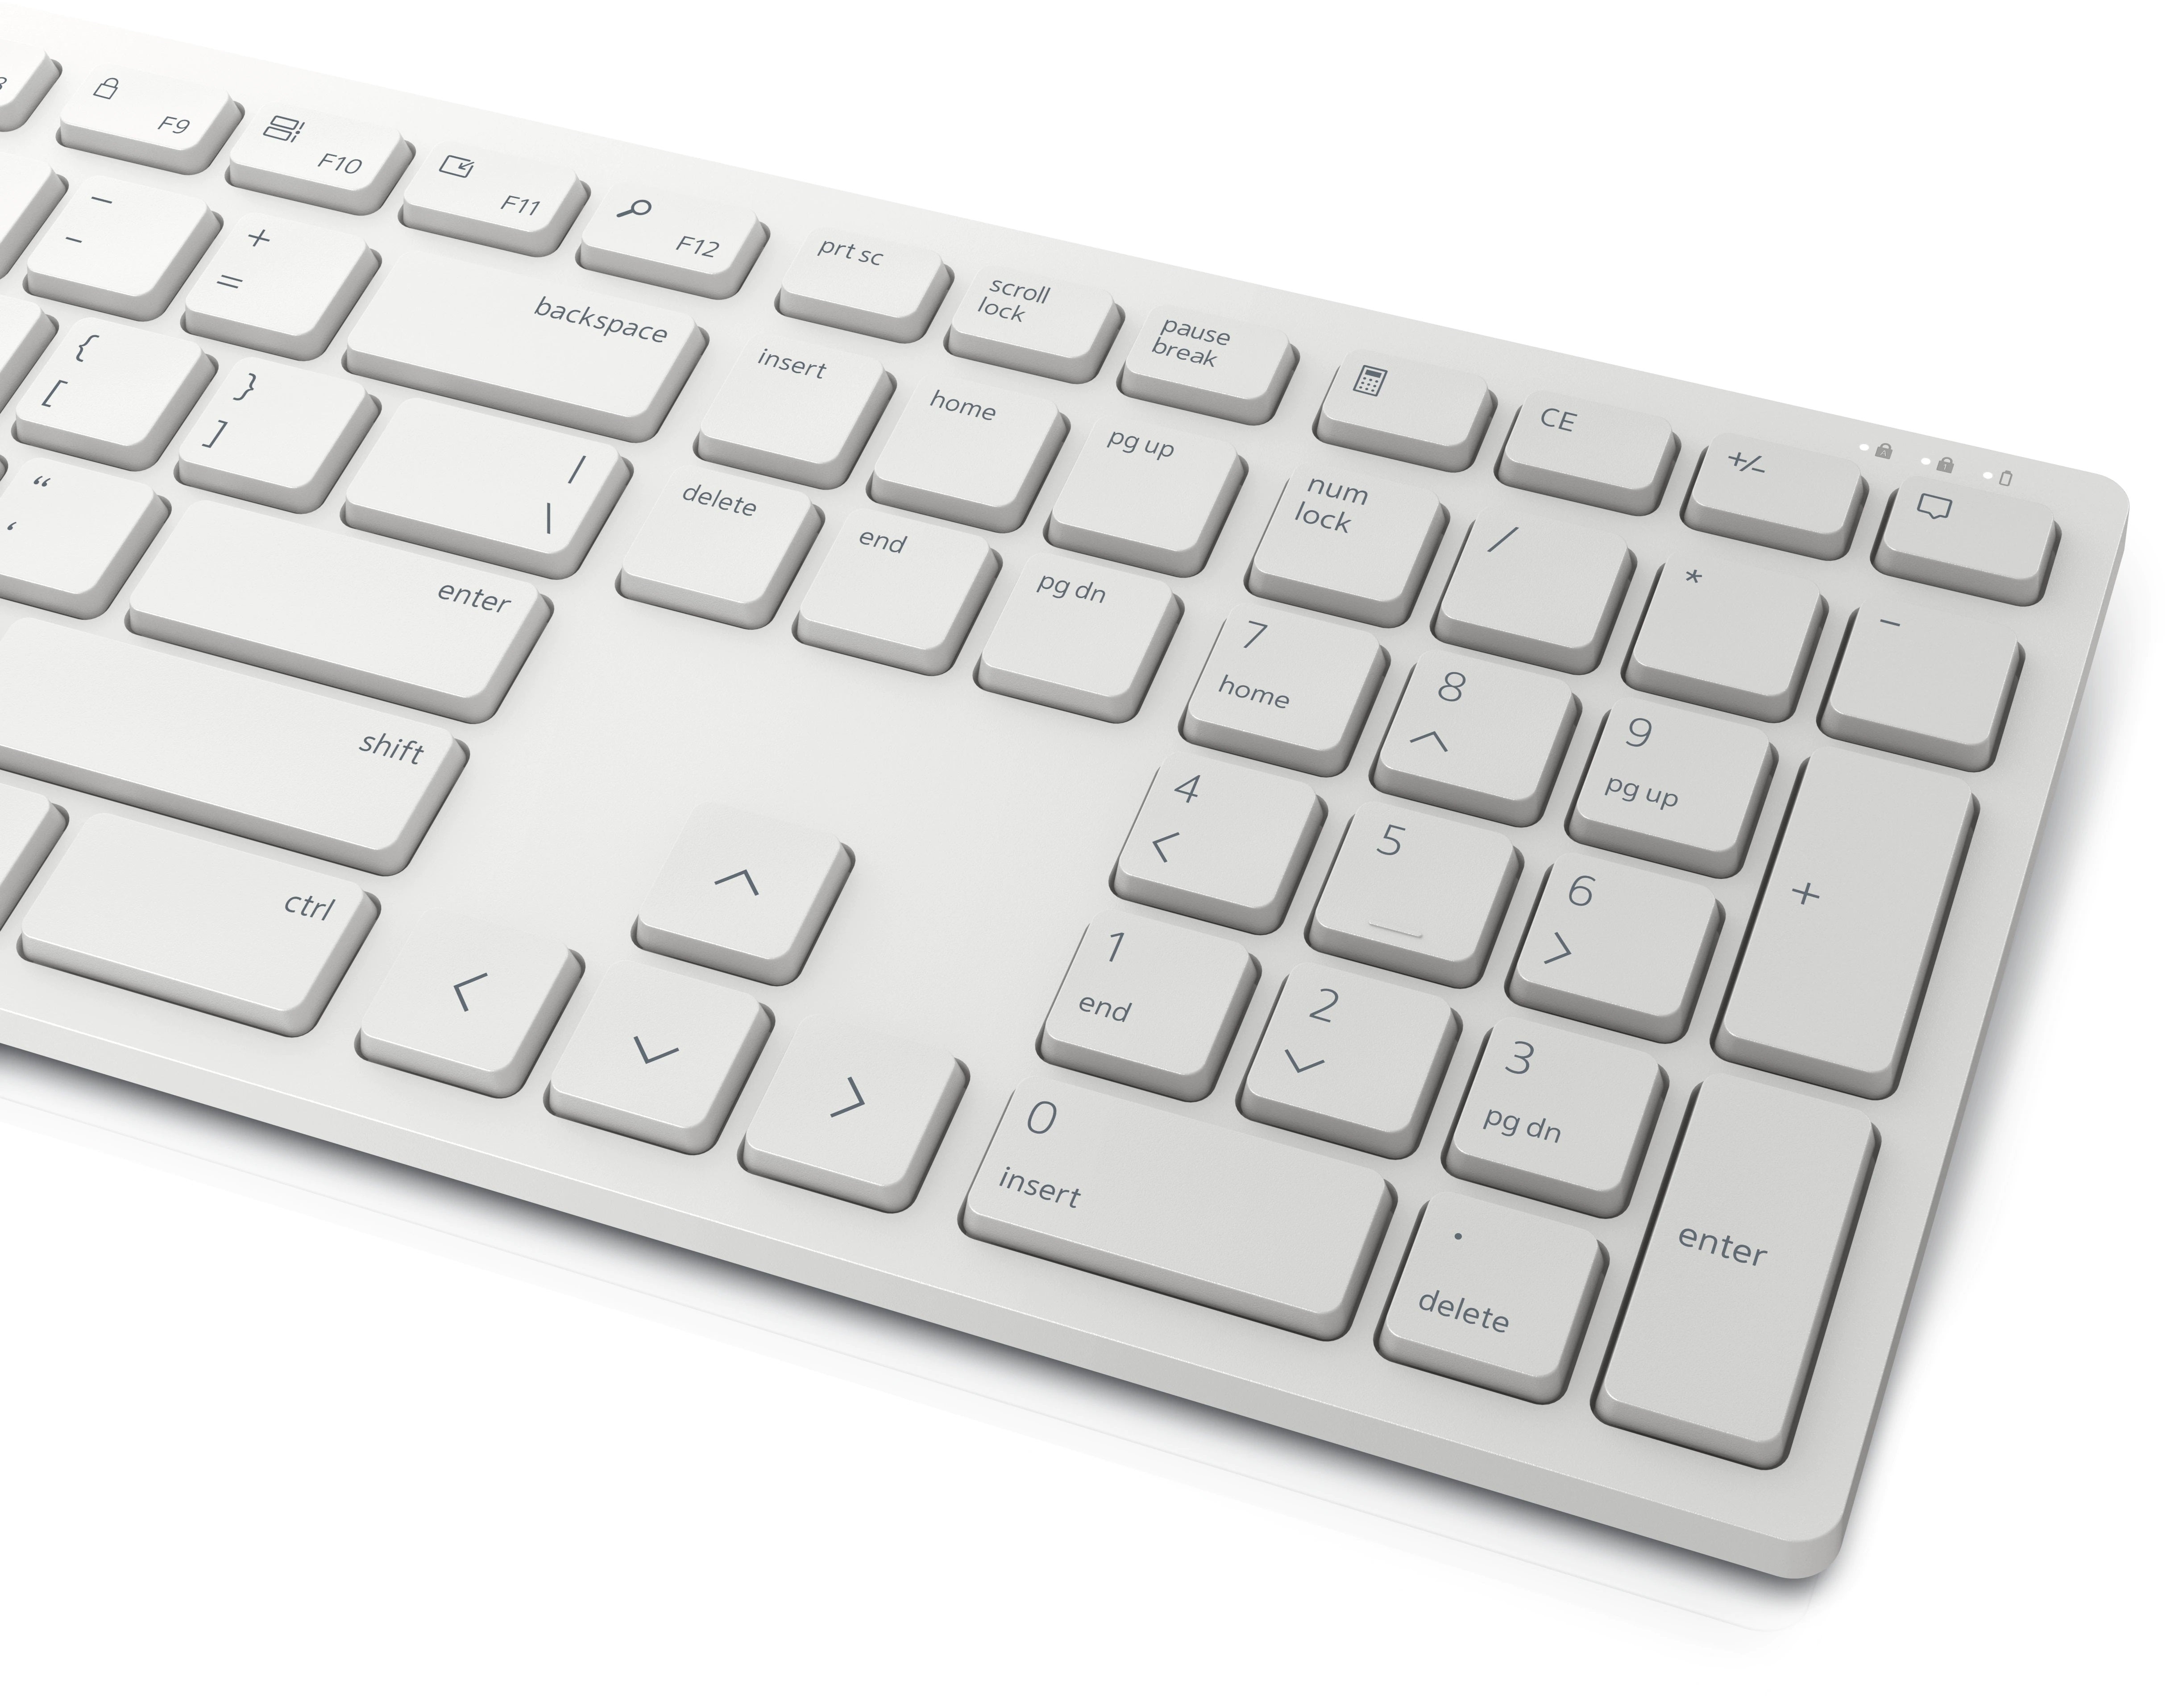 DELL Wireless Keyboard and Mouse KM5221W - Albagame